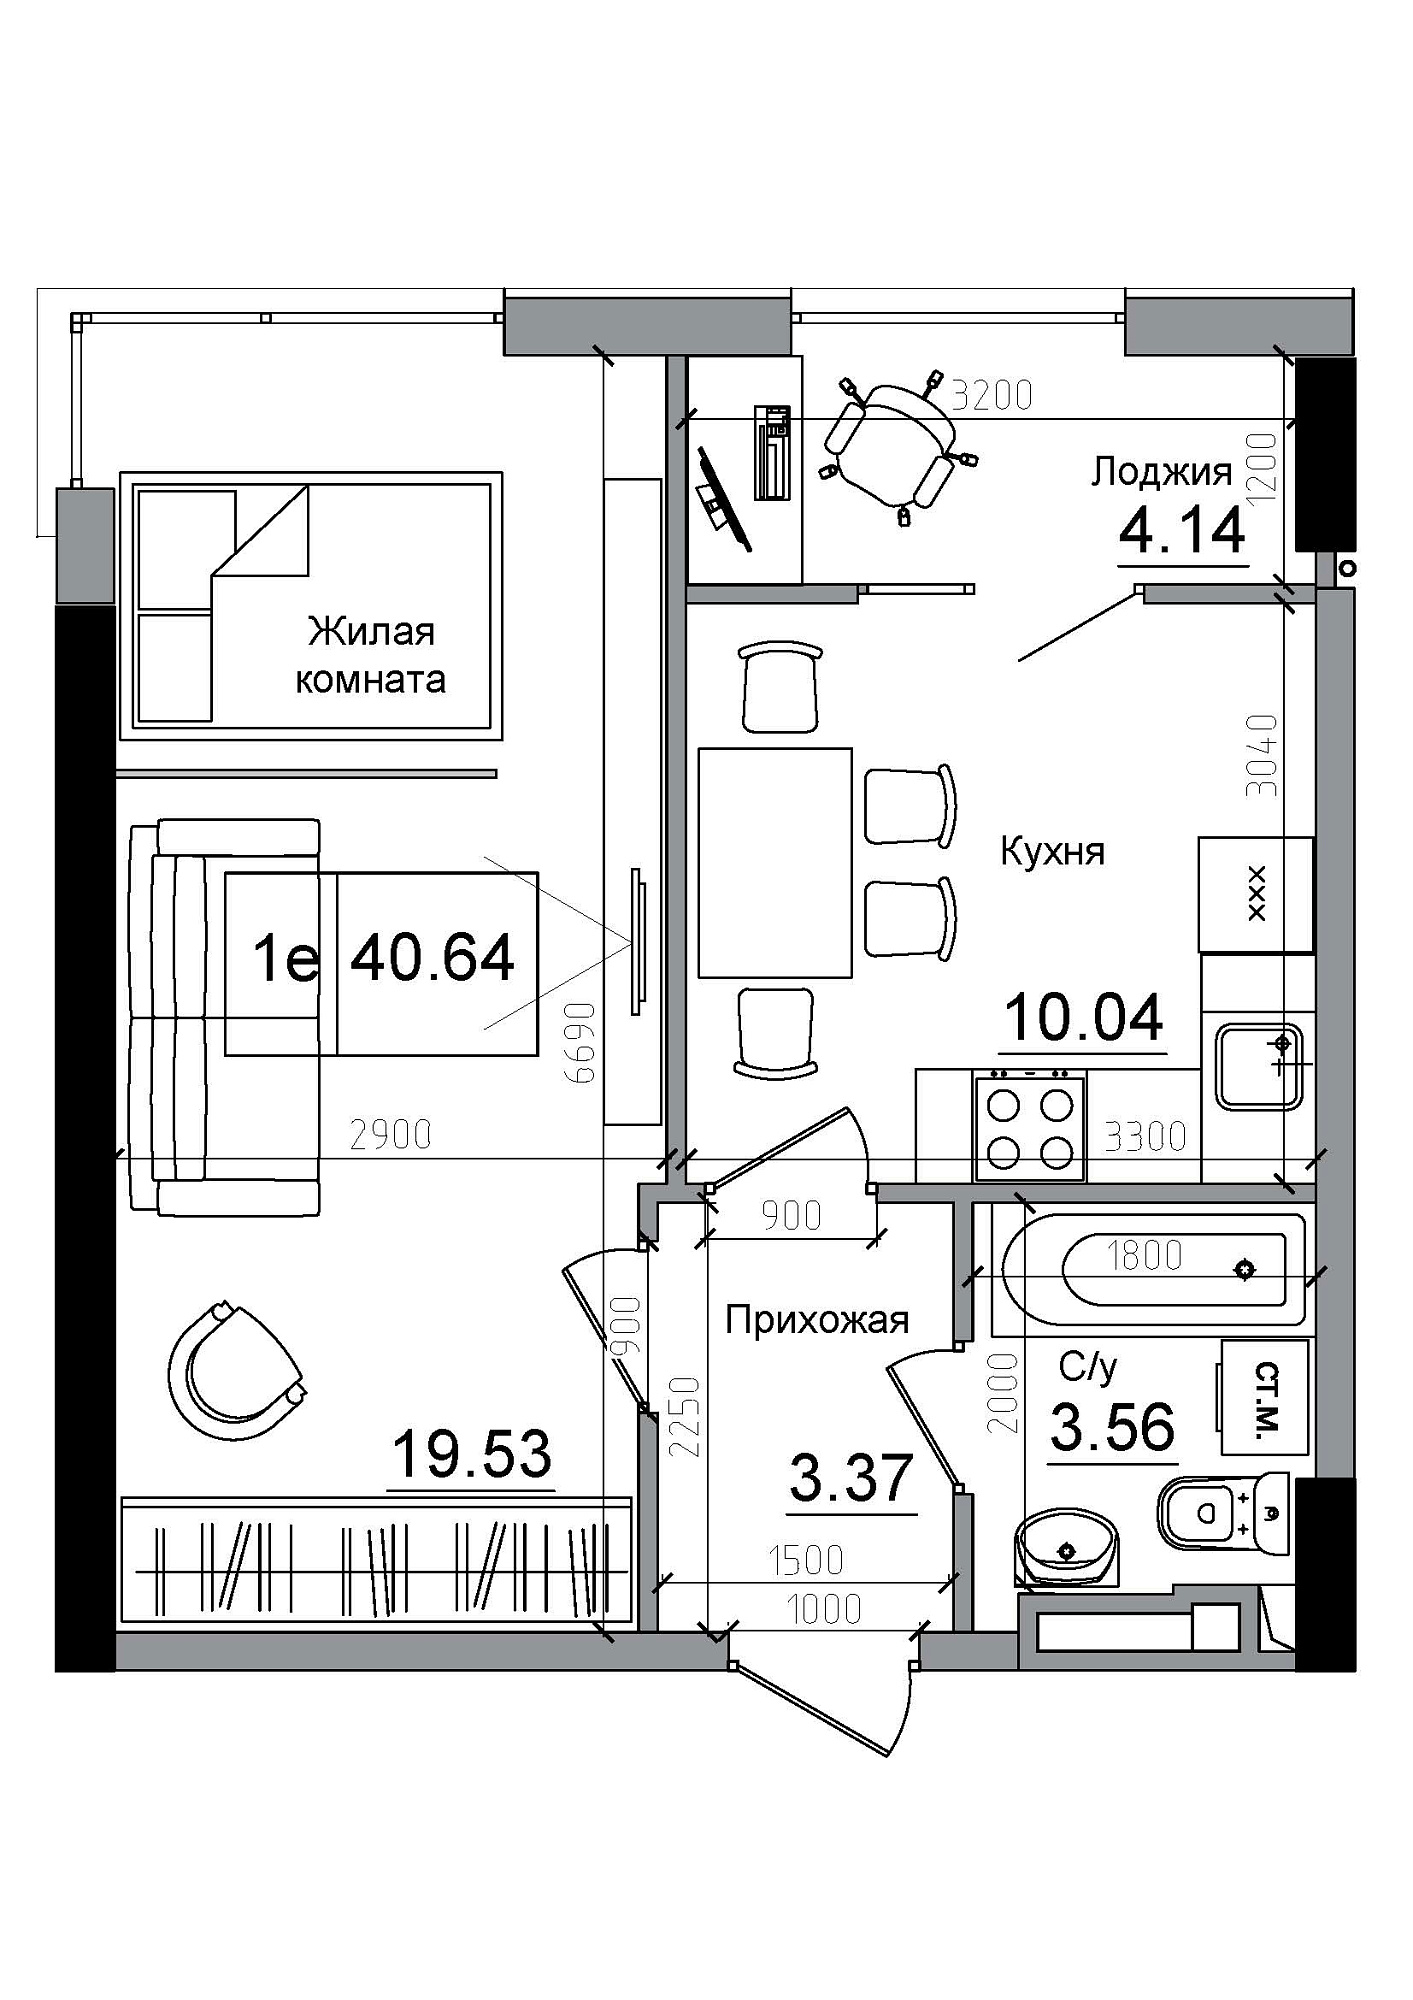 Planning 1-rm flats area 40.64m2, AB-12-05/00006.